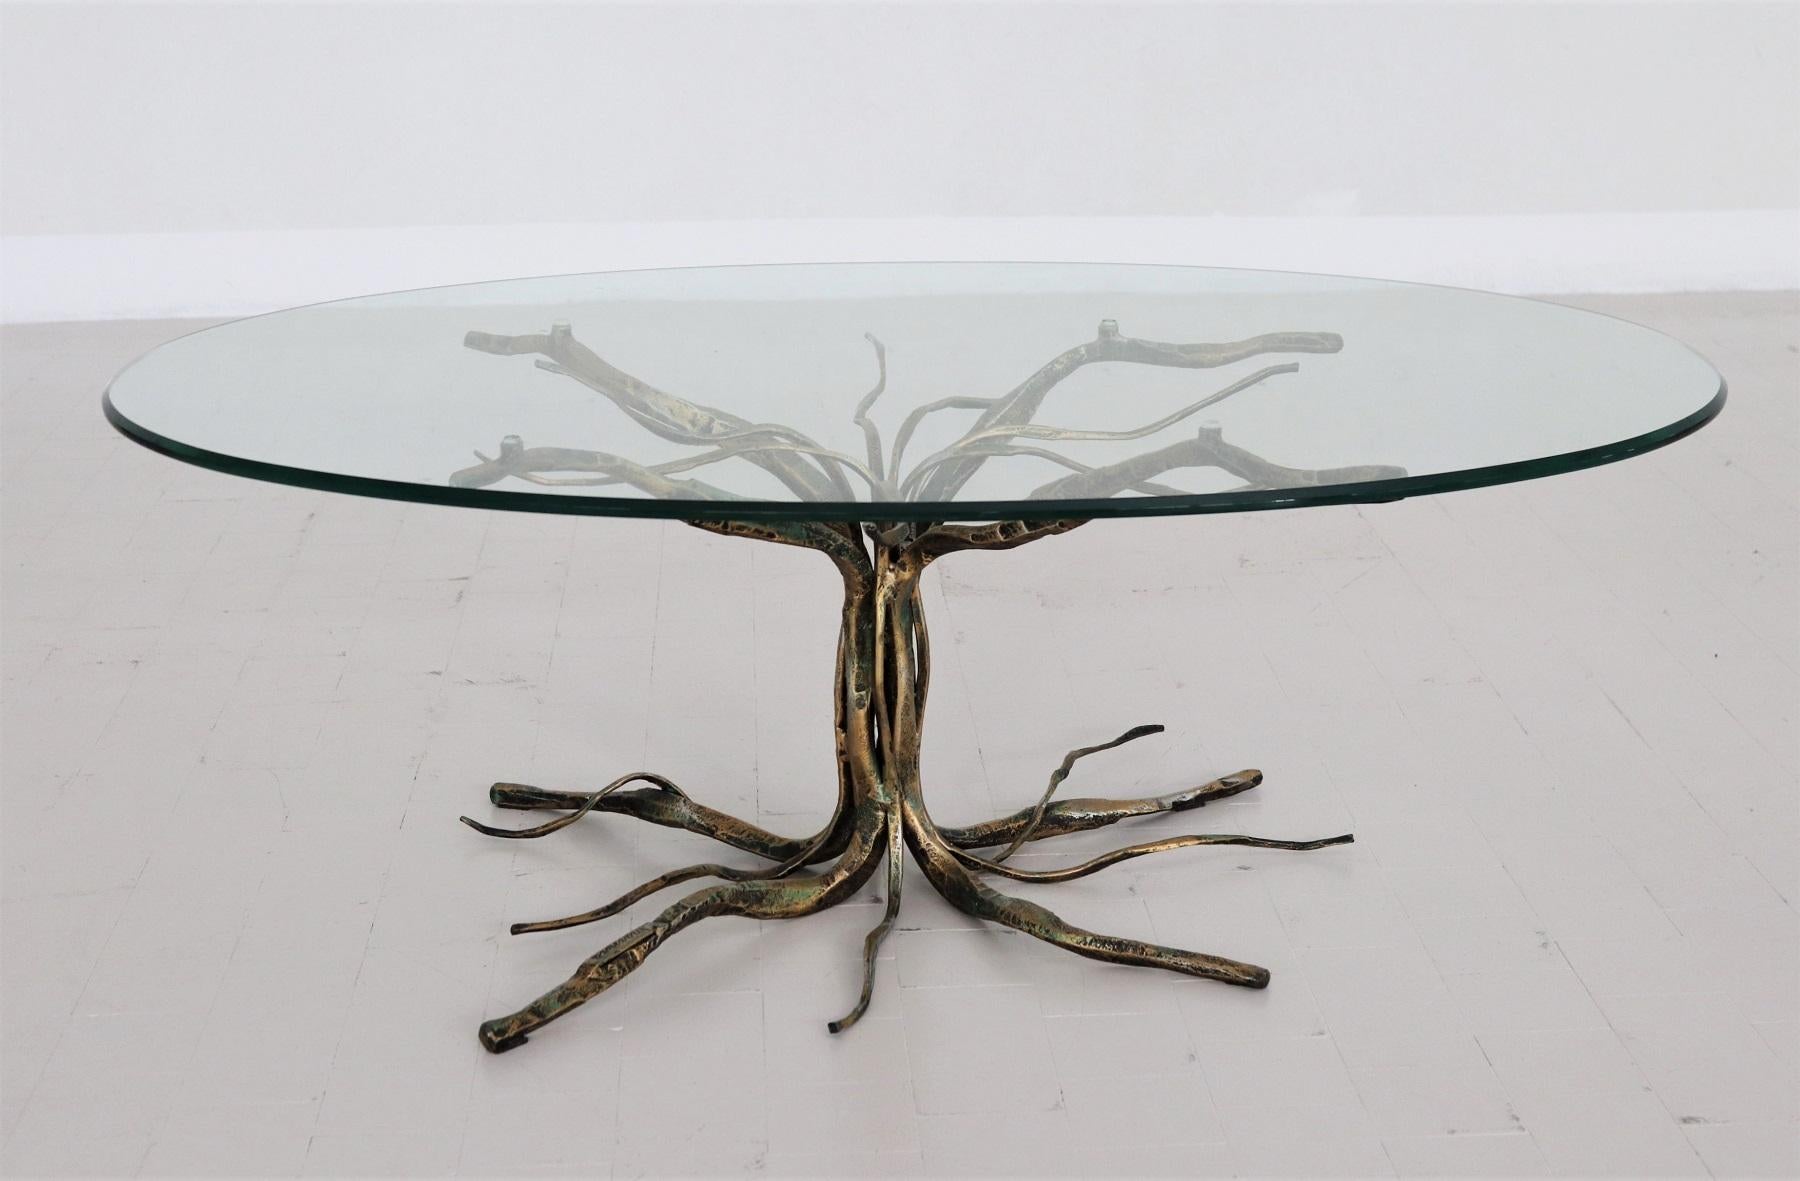 Italian Brutalist Coffee Table in Tree Shape by Salvino Marsura 1960s For Sale 2